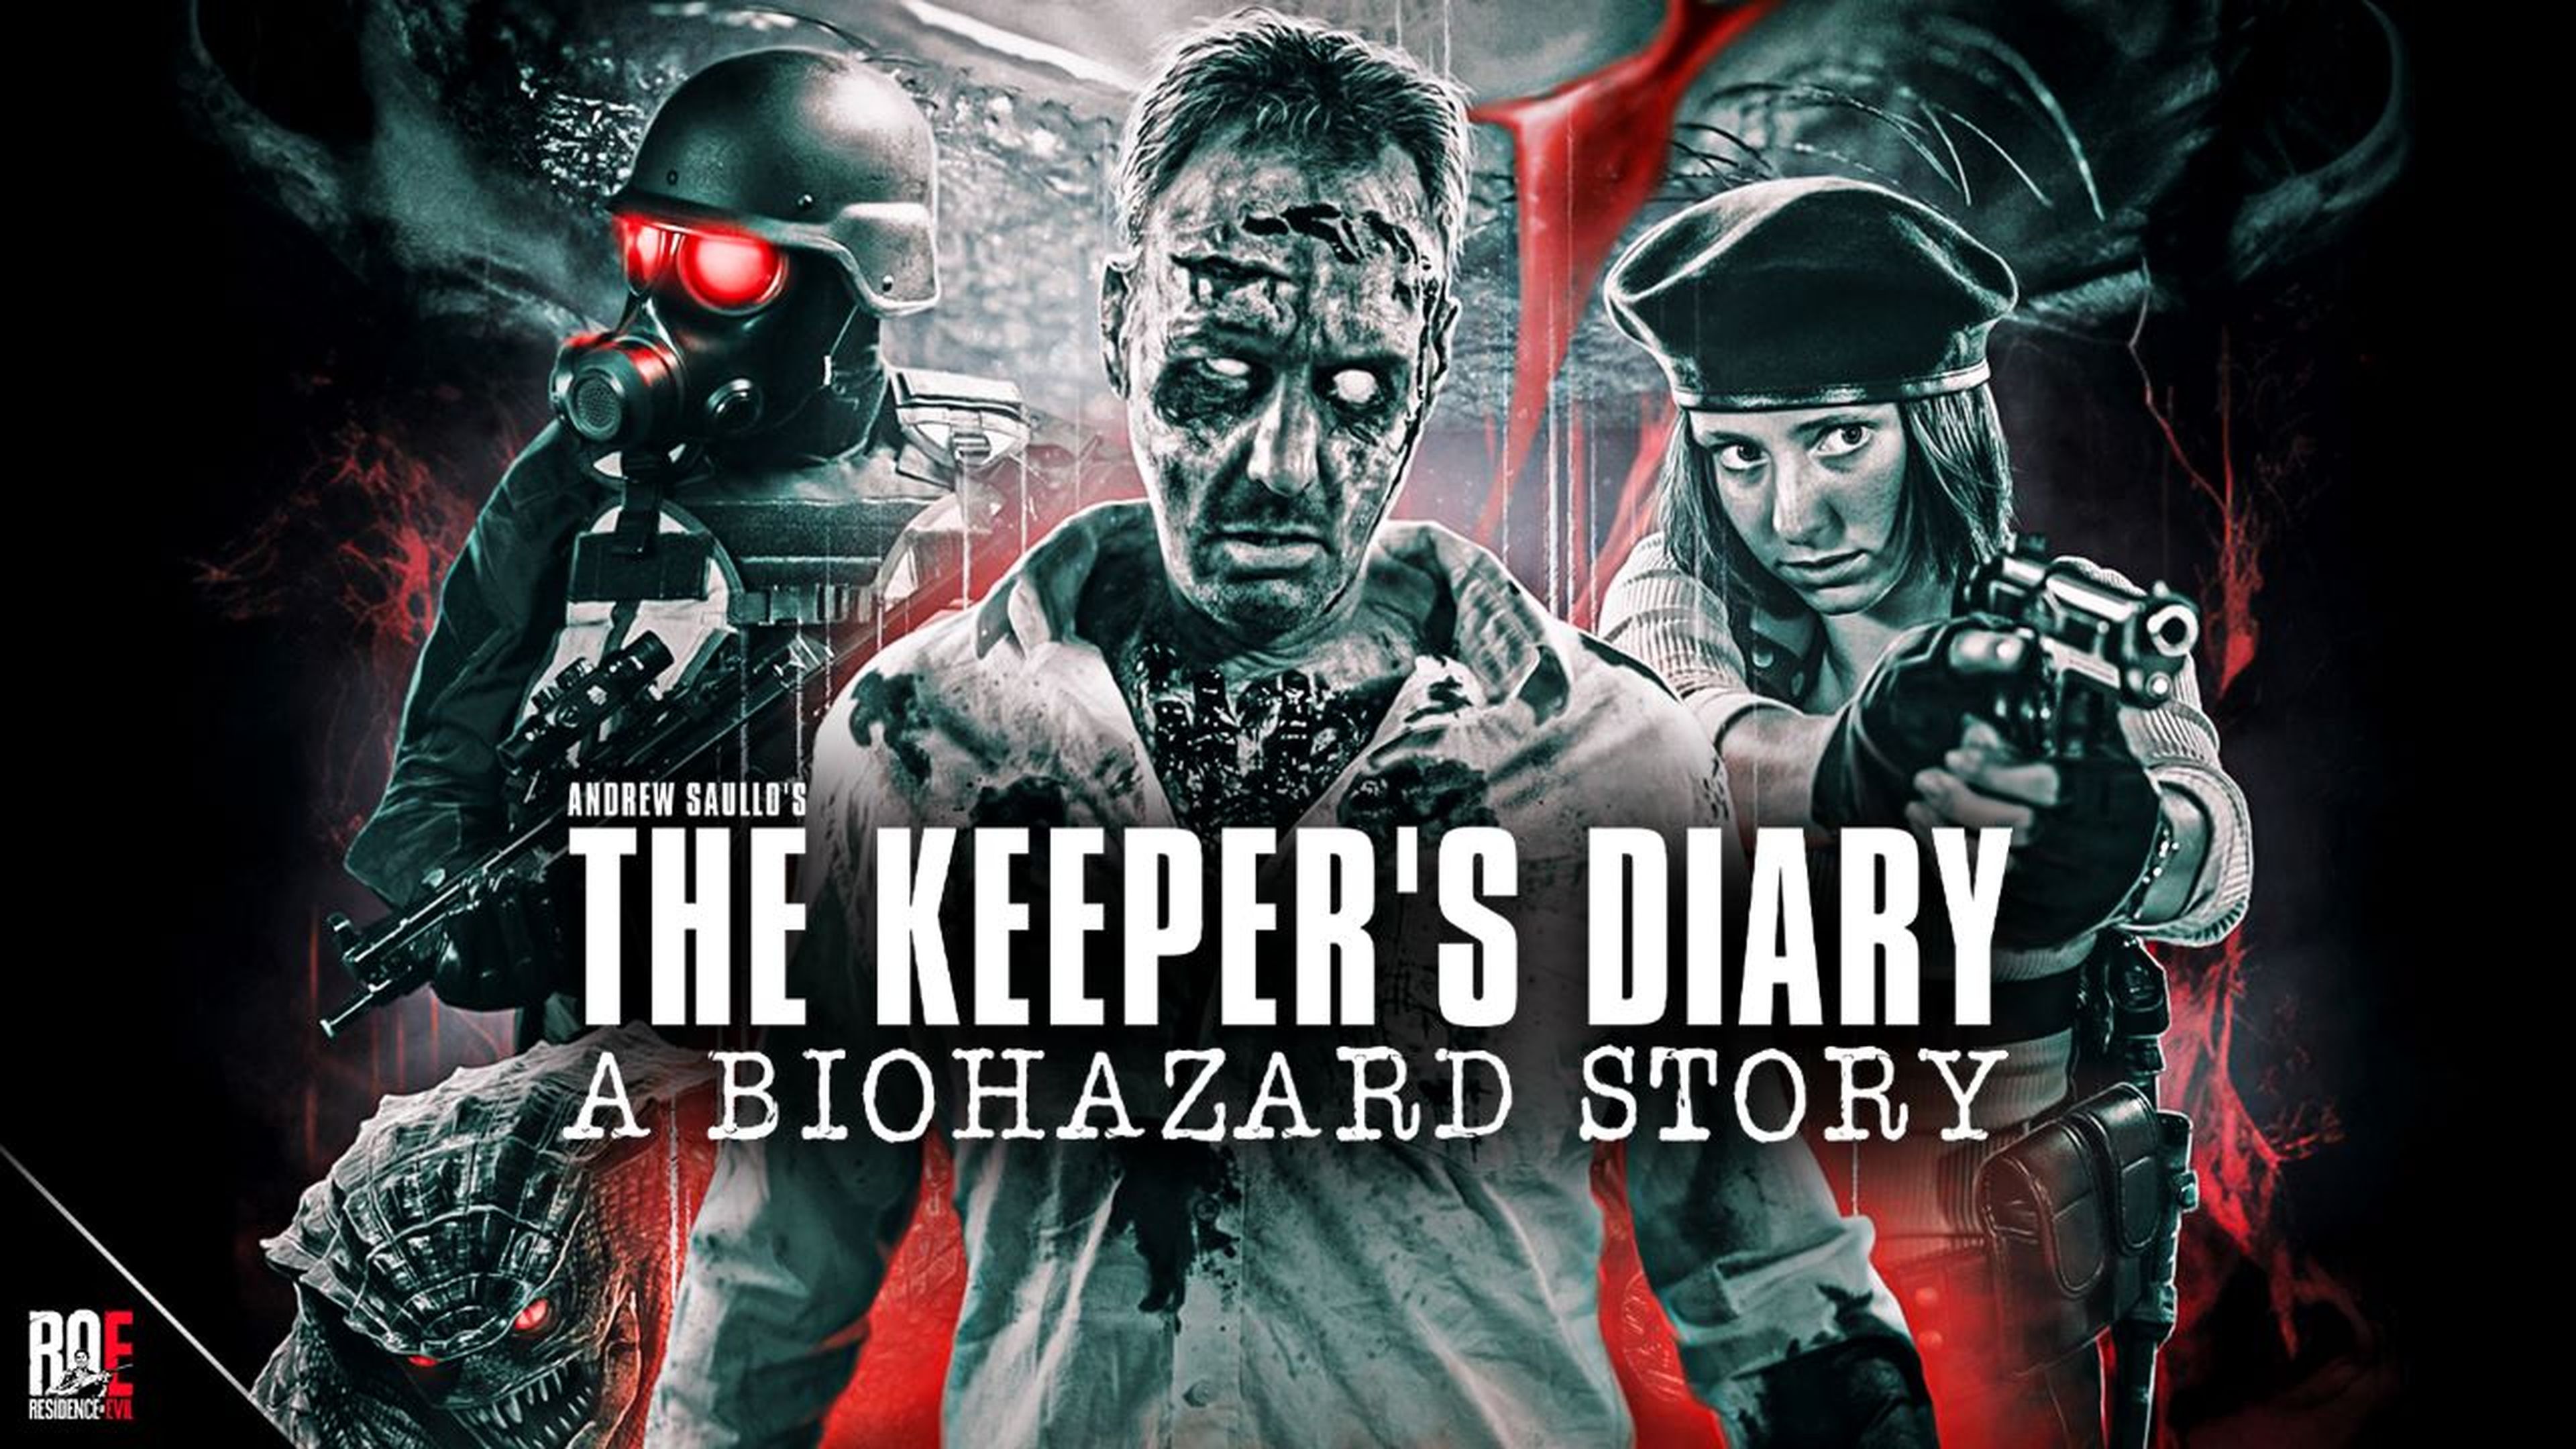 Resident Evil: The Keeper's Diary (corto hecho por fans)